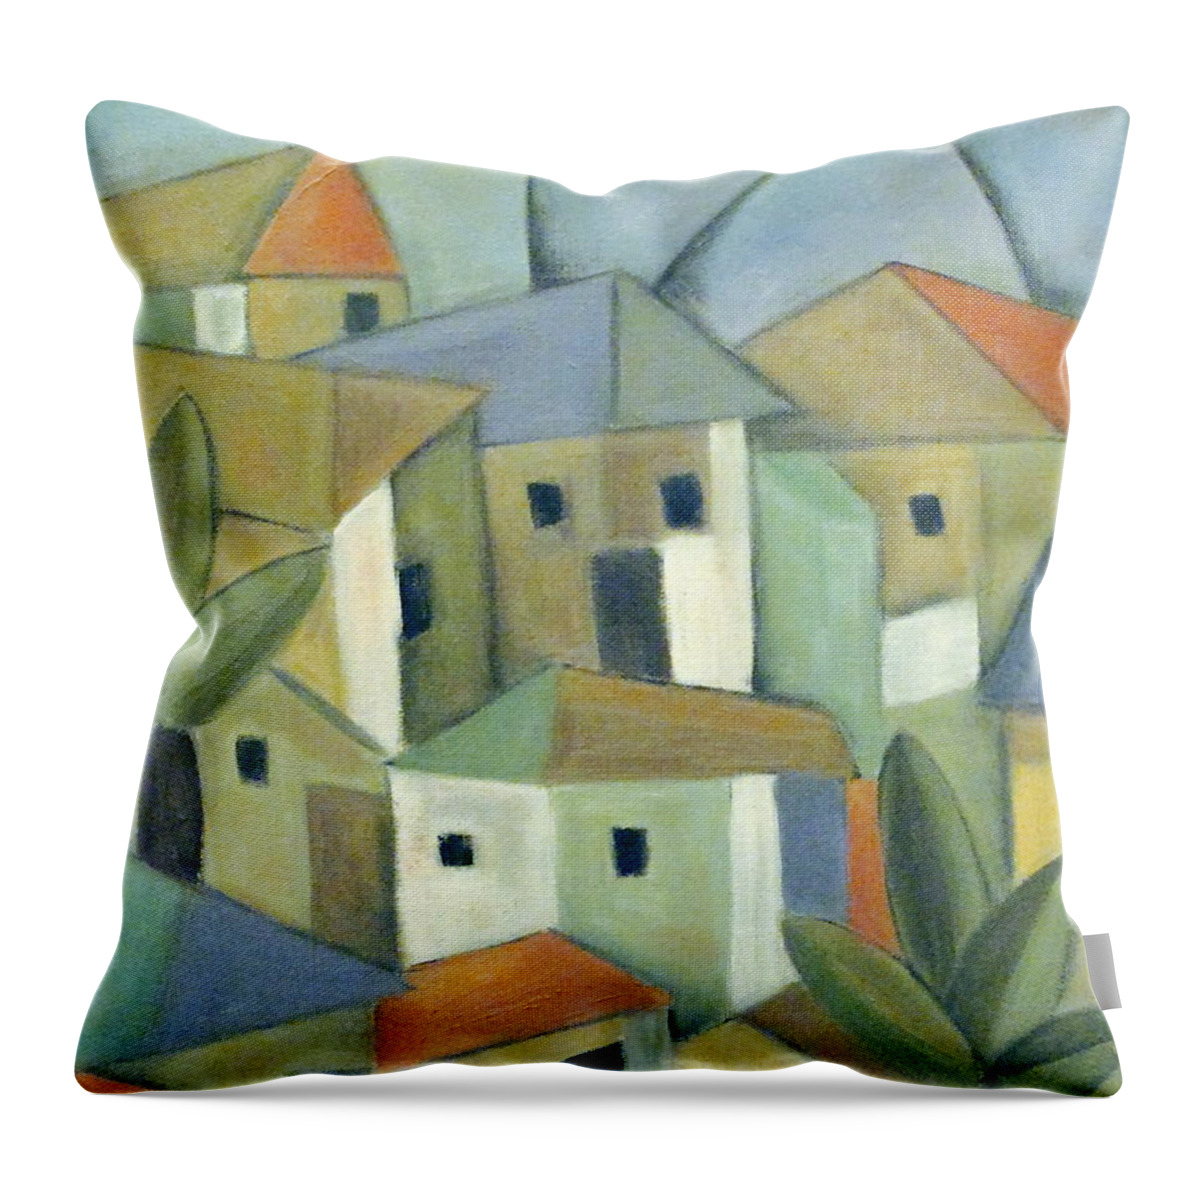 Landscape Throw Pillow featuring the painting Casas II by Trish Toro